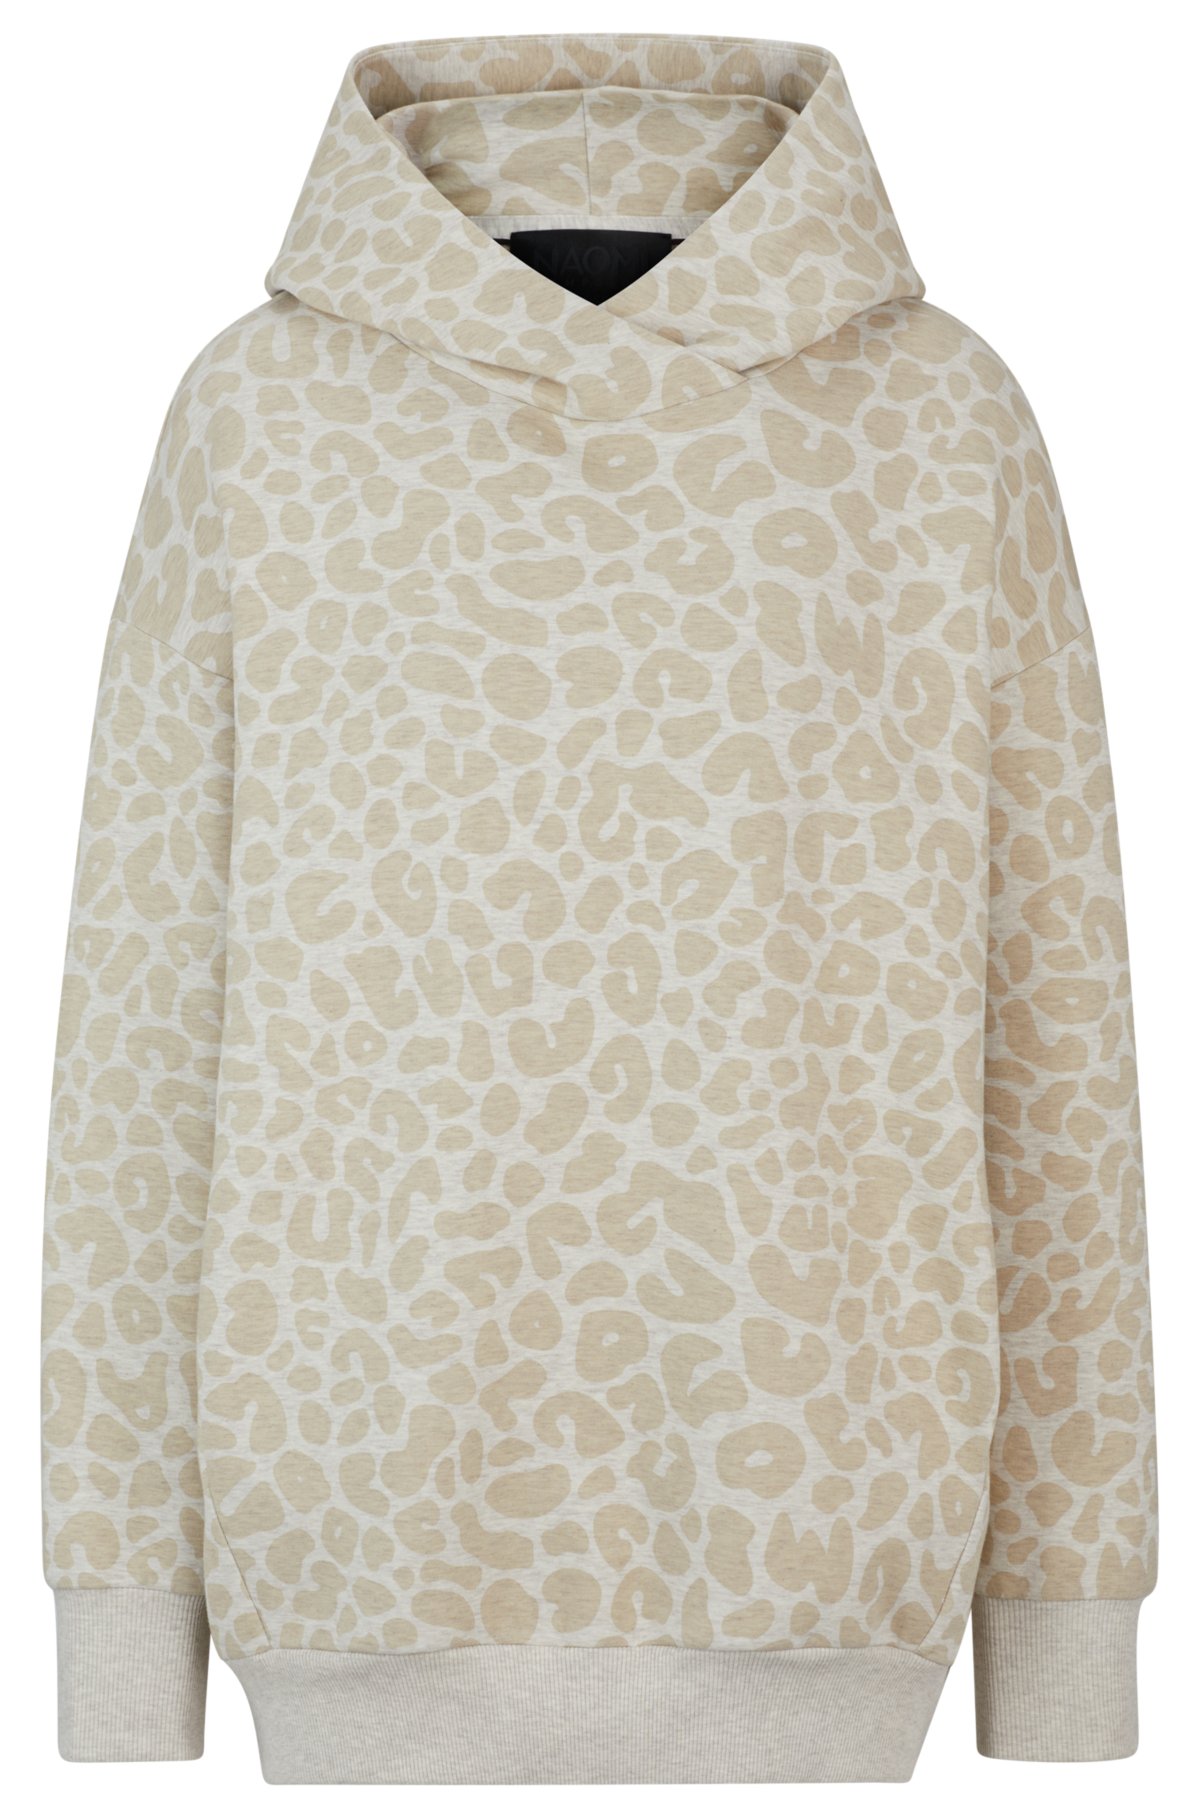 NAOMI x BOSS longline cotton-blend hoodie with leopard print, Natural